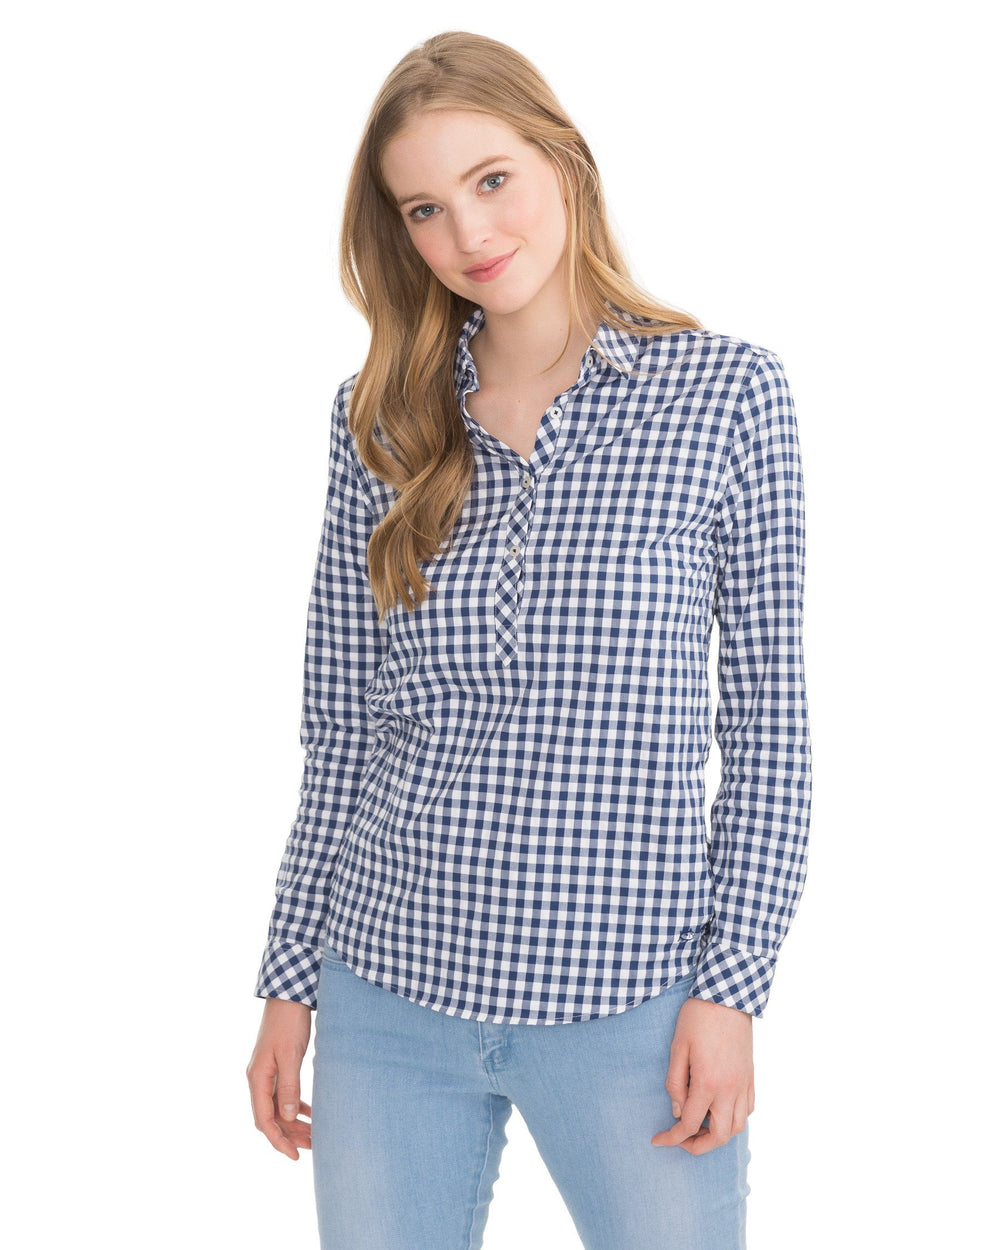 The front view of the Southern Tide Gameday Intercoastal Hadley Popover by Southern Tide - Yacht Blue